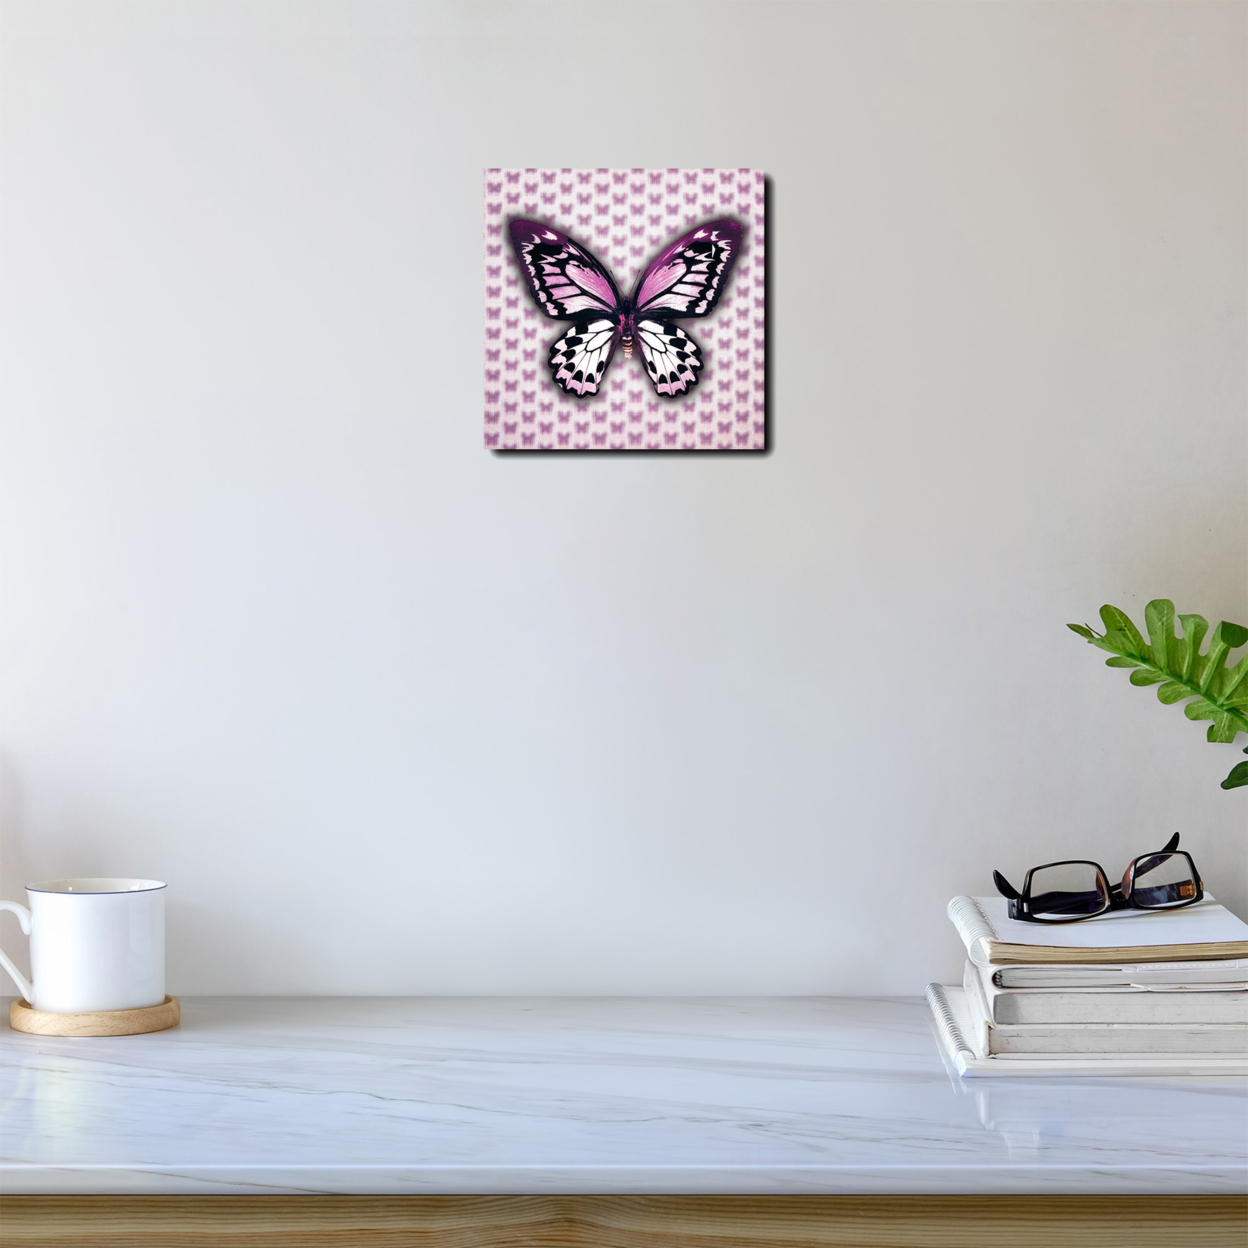 Multi-Dimensional Custom Made 5D Purple Butterfly Wall Art Print On Strong Polycarbonate Panel - Lenticular Artwork By Matashi (6x6 Inch)